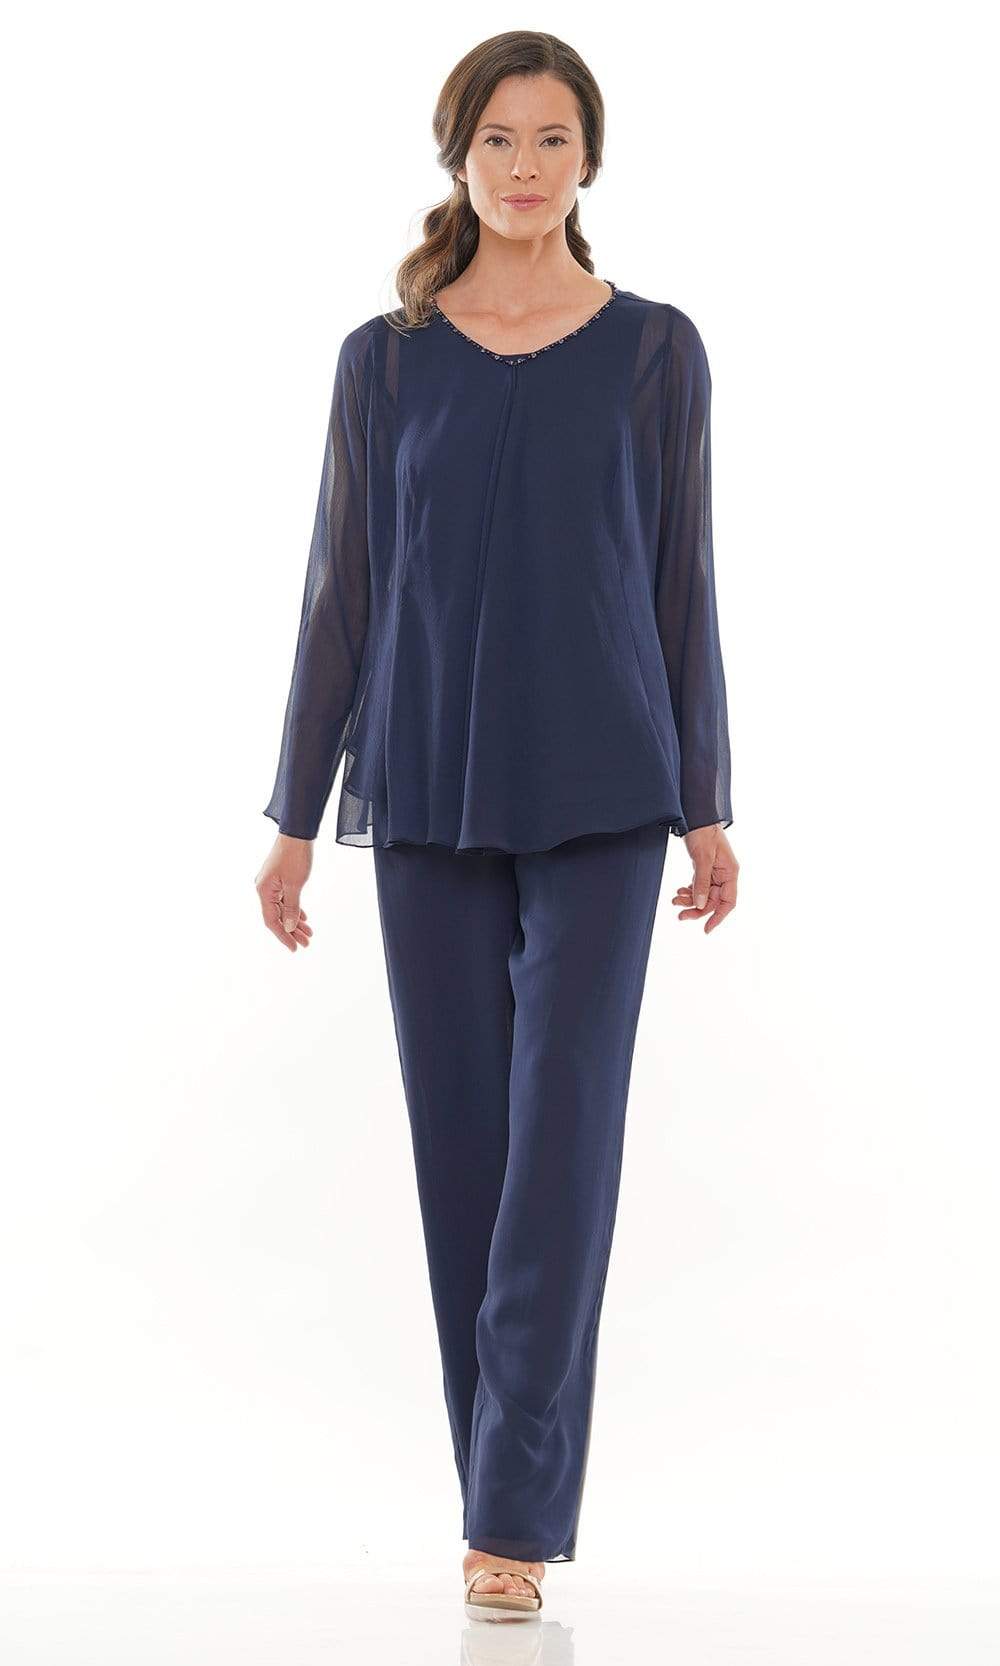 Marsoni by Colors - M304 Long Sleeves Jacket Pantsuit Mother of the Bride Dresses 6 / Navy